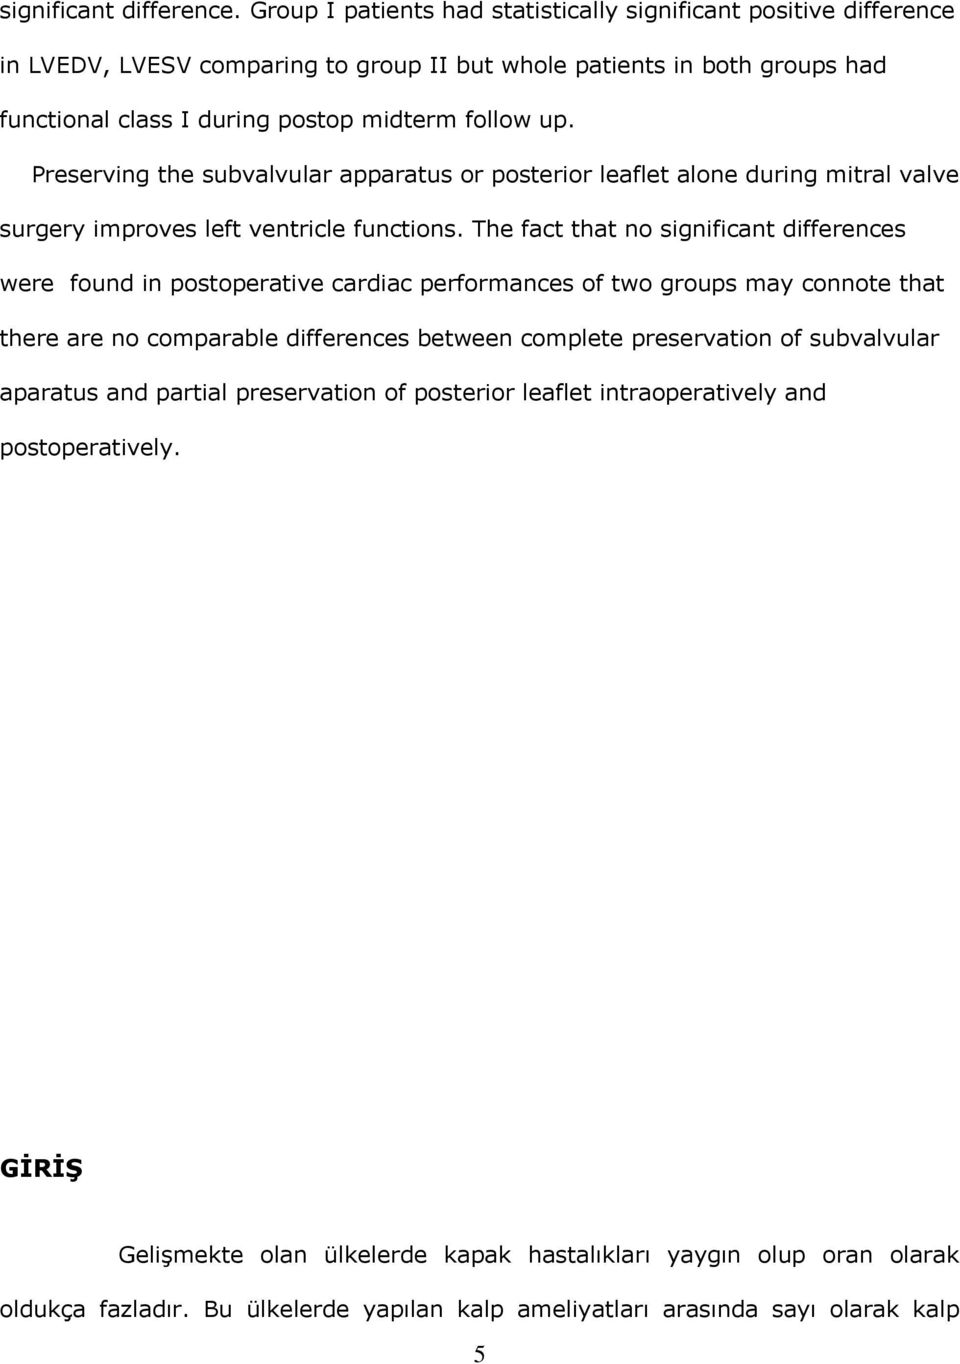 Preserving the subvalvular apparatus or posterior leaflet alone during mitral valve surgery improves left ventricle functions.